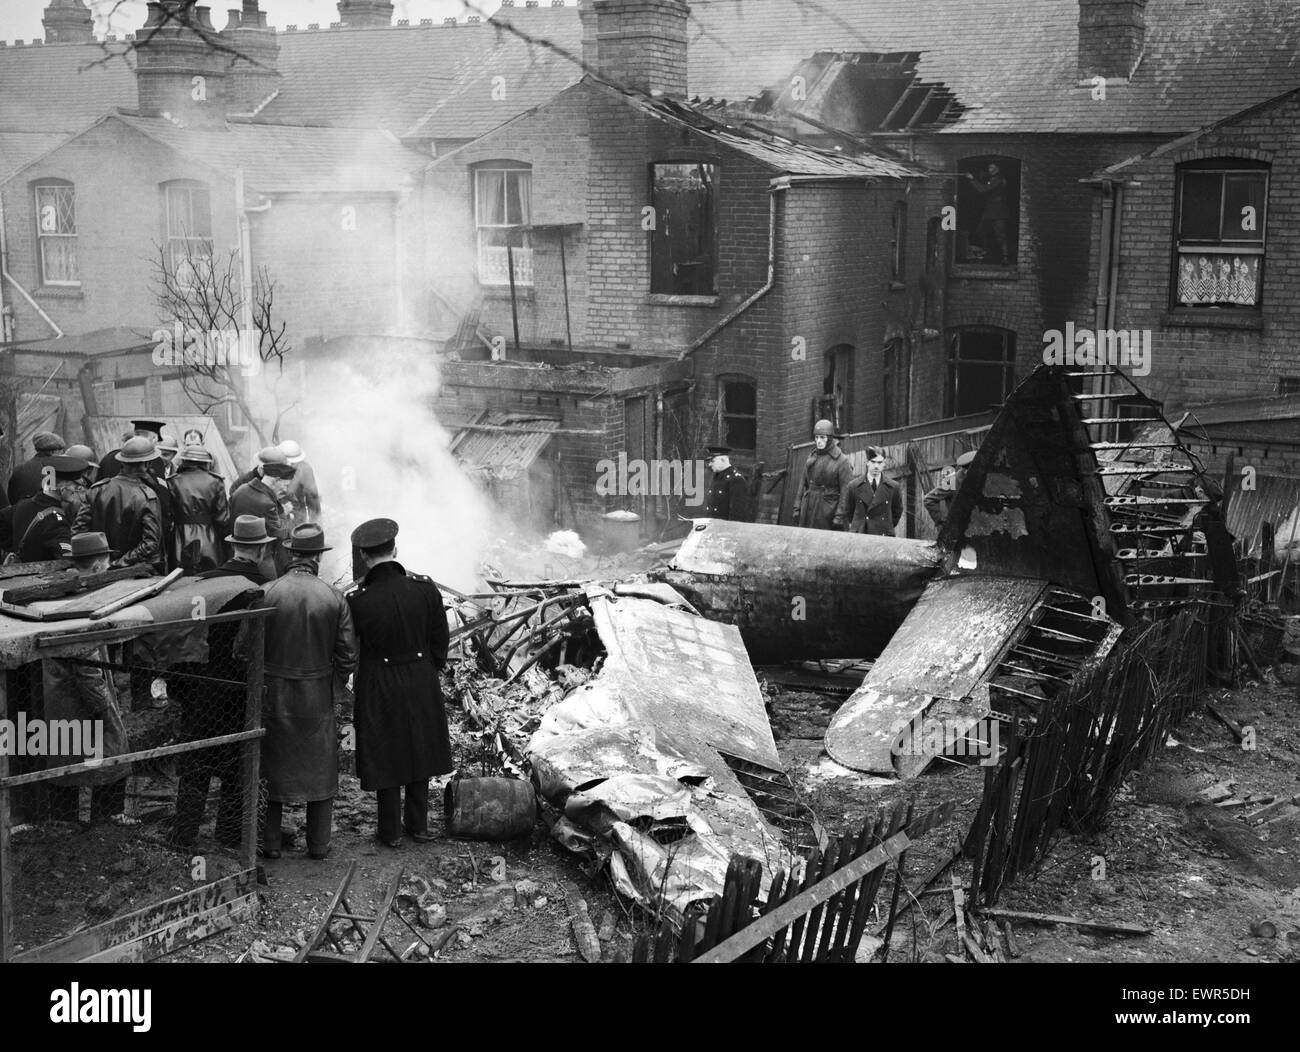 Site of a downed Bristol Blenheim in Bearwood, Birmingham during the Second World War showing emergency services at the scene in a residential street after it collided with a barrage balloon cable. 20th February 1942. Stock Photo